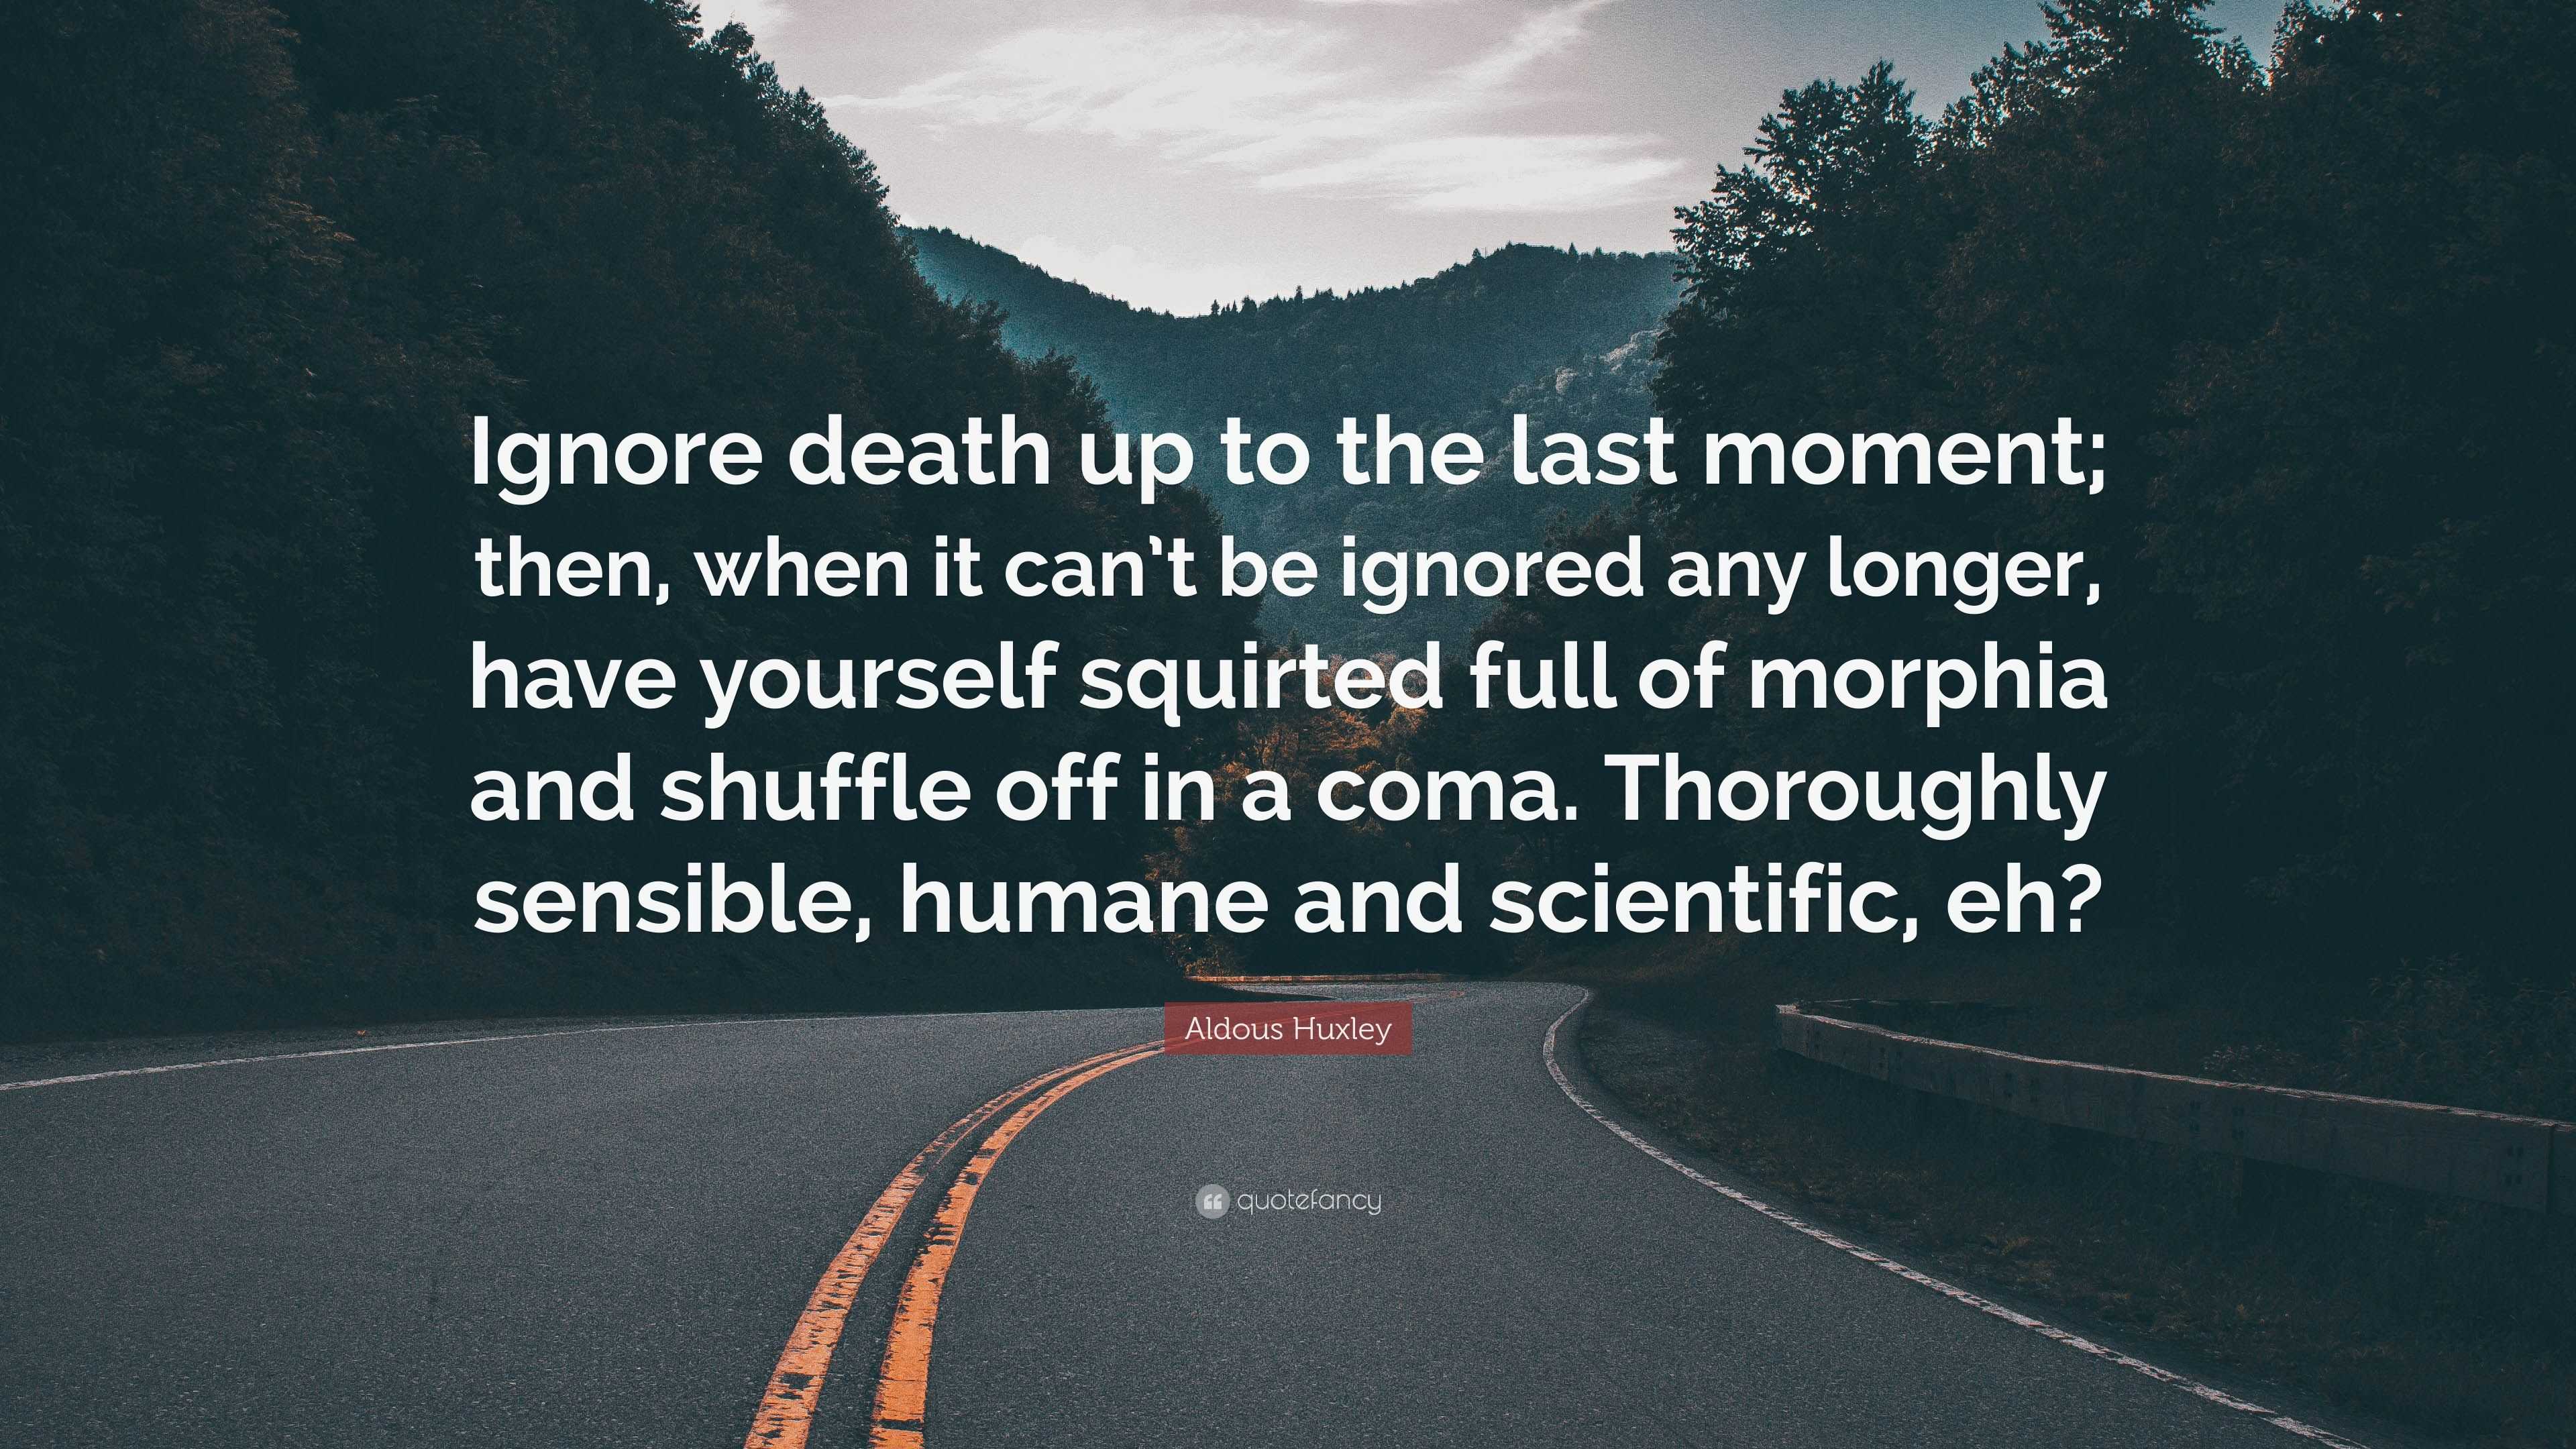 Aldous Huxley Quote: “Ignore death up to the last moment; then, when it ...